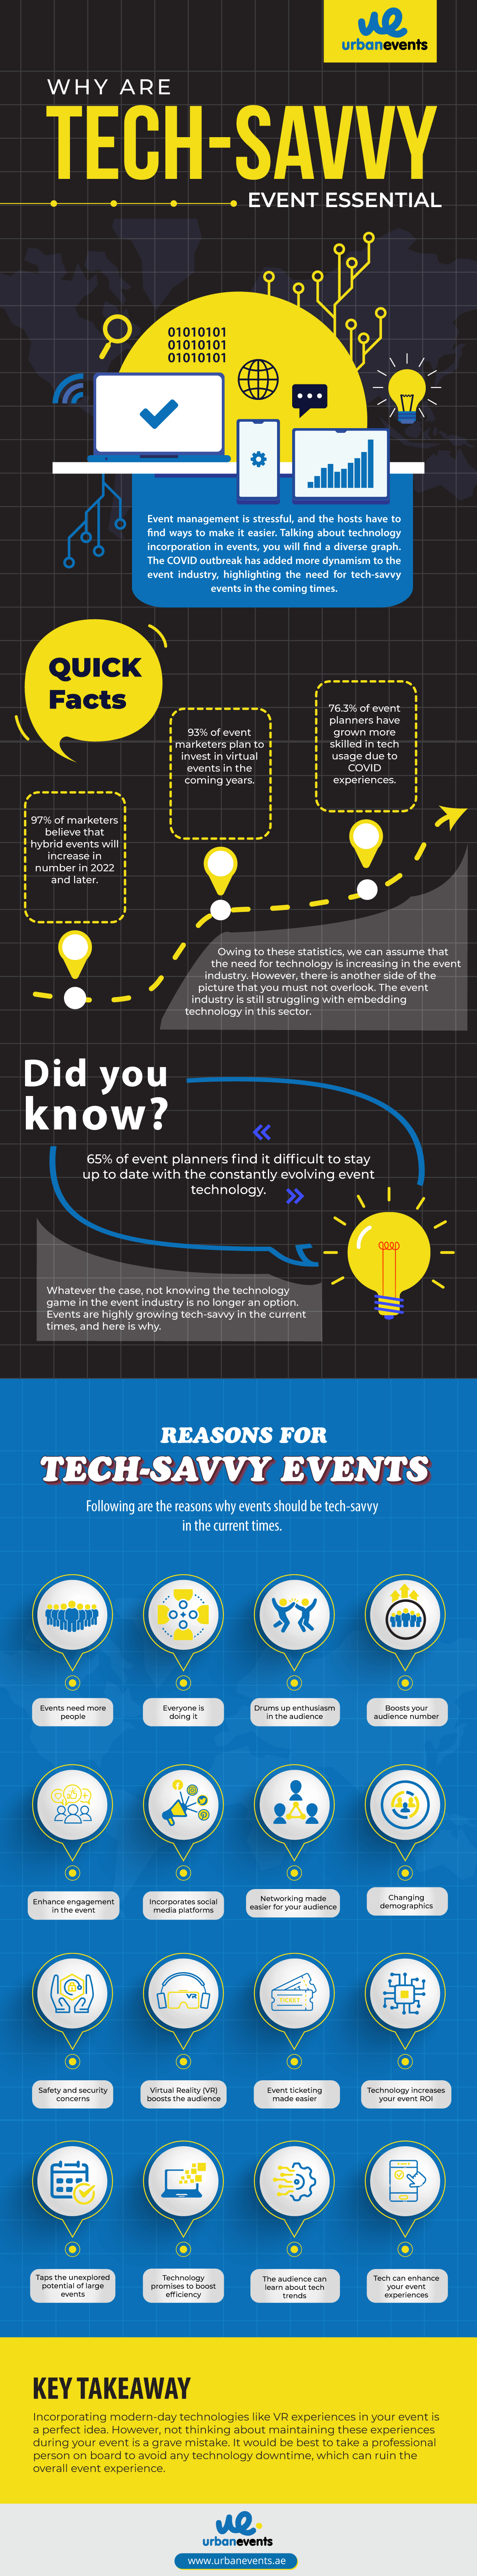 Why are tech-savvy events essential?